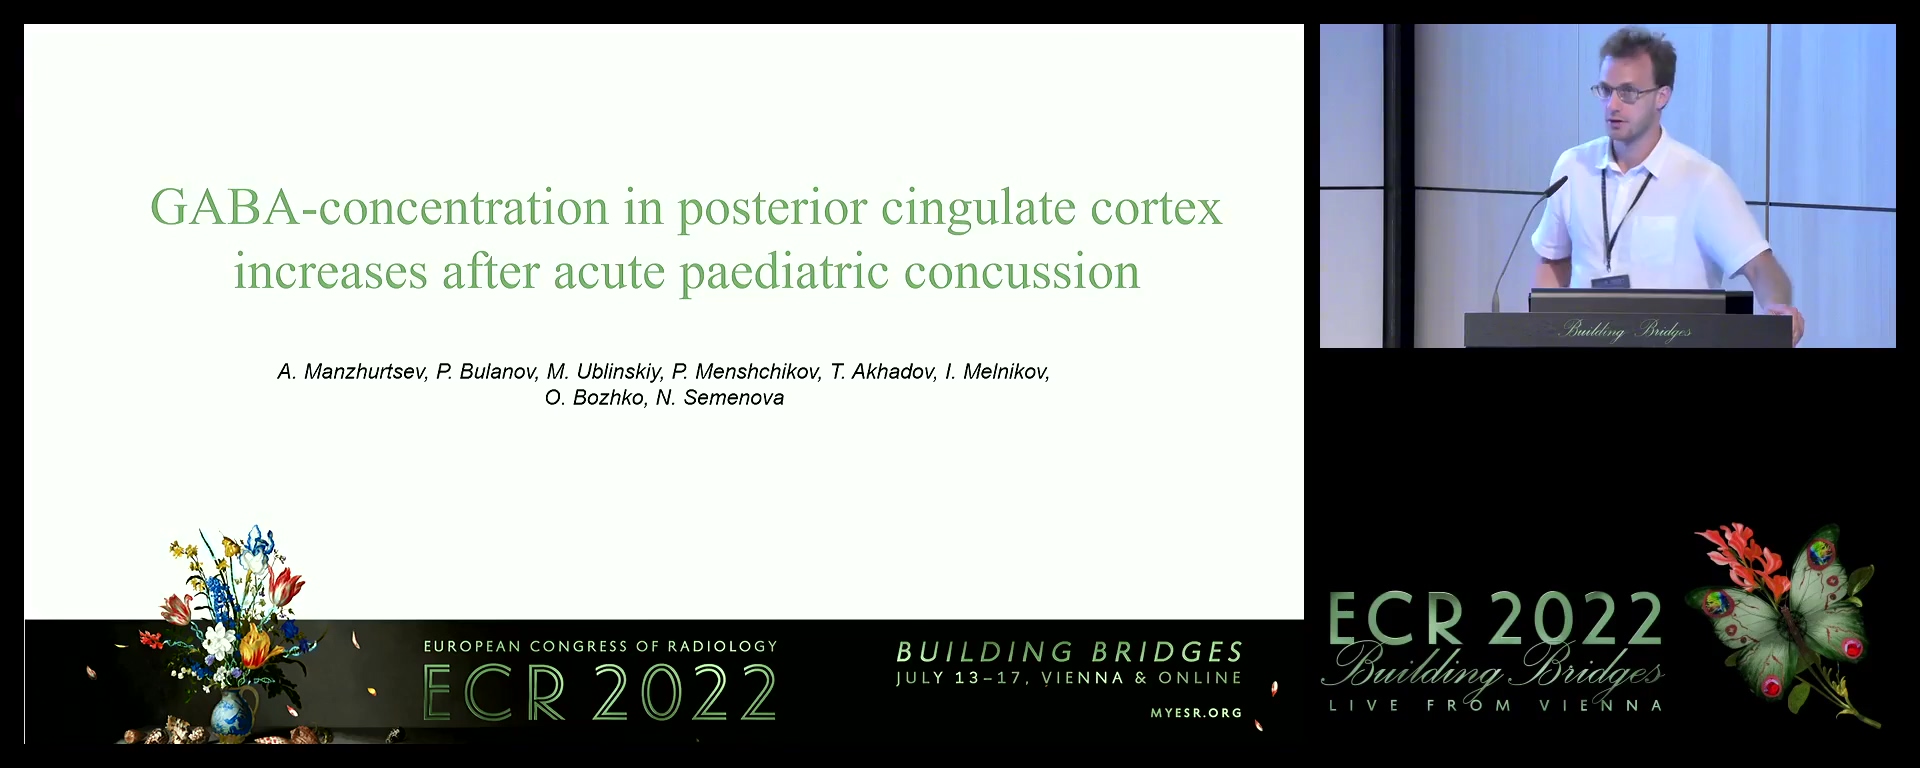 GABA-concentration in posterior cingulate cortex increases after acute paediatric concussion - Andrei Manzhurtsev, Moscow / RU